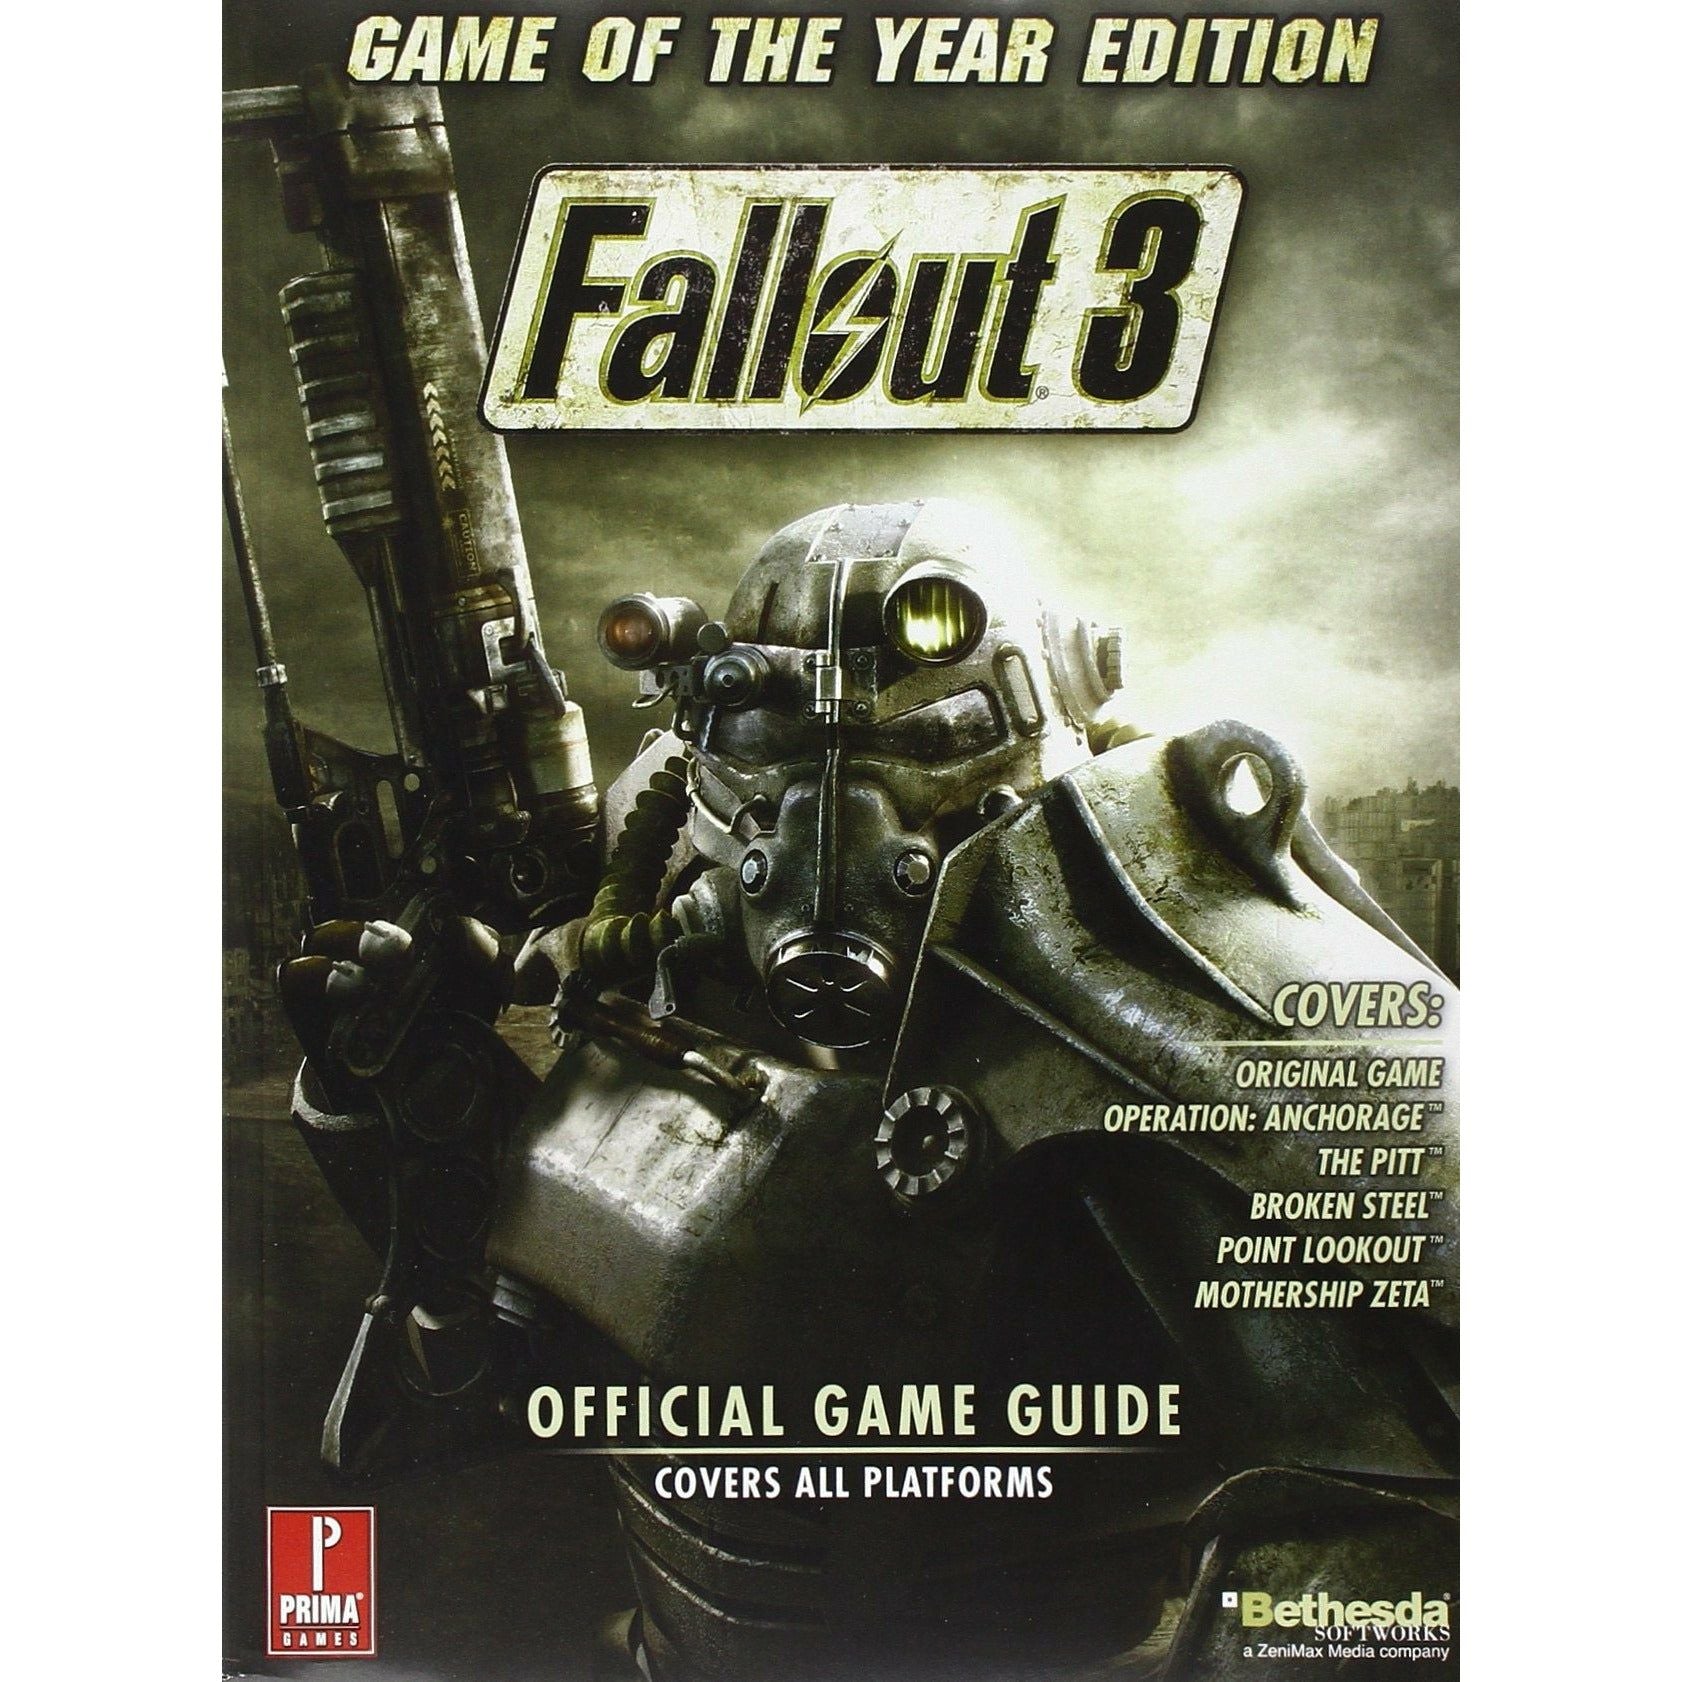 STRAT - Fallout 3 Game of the Year Official Game Guide (Prima)